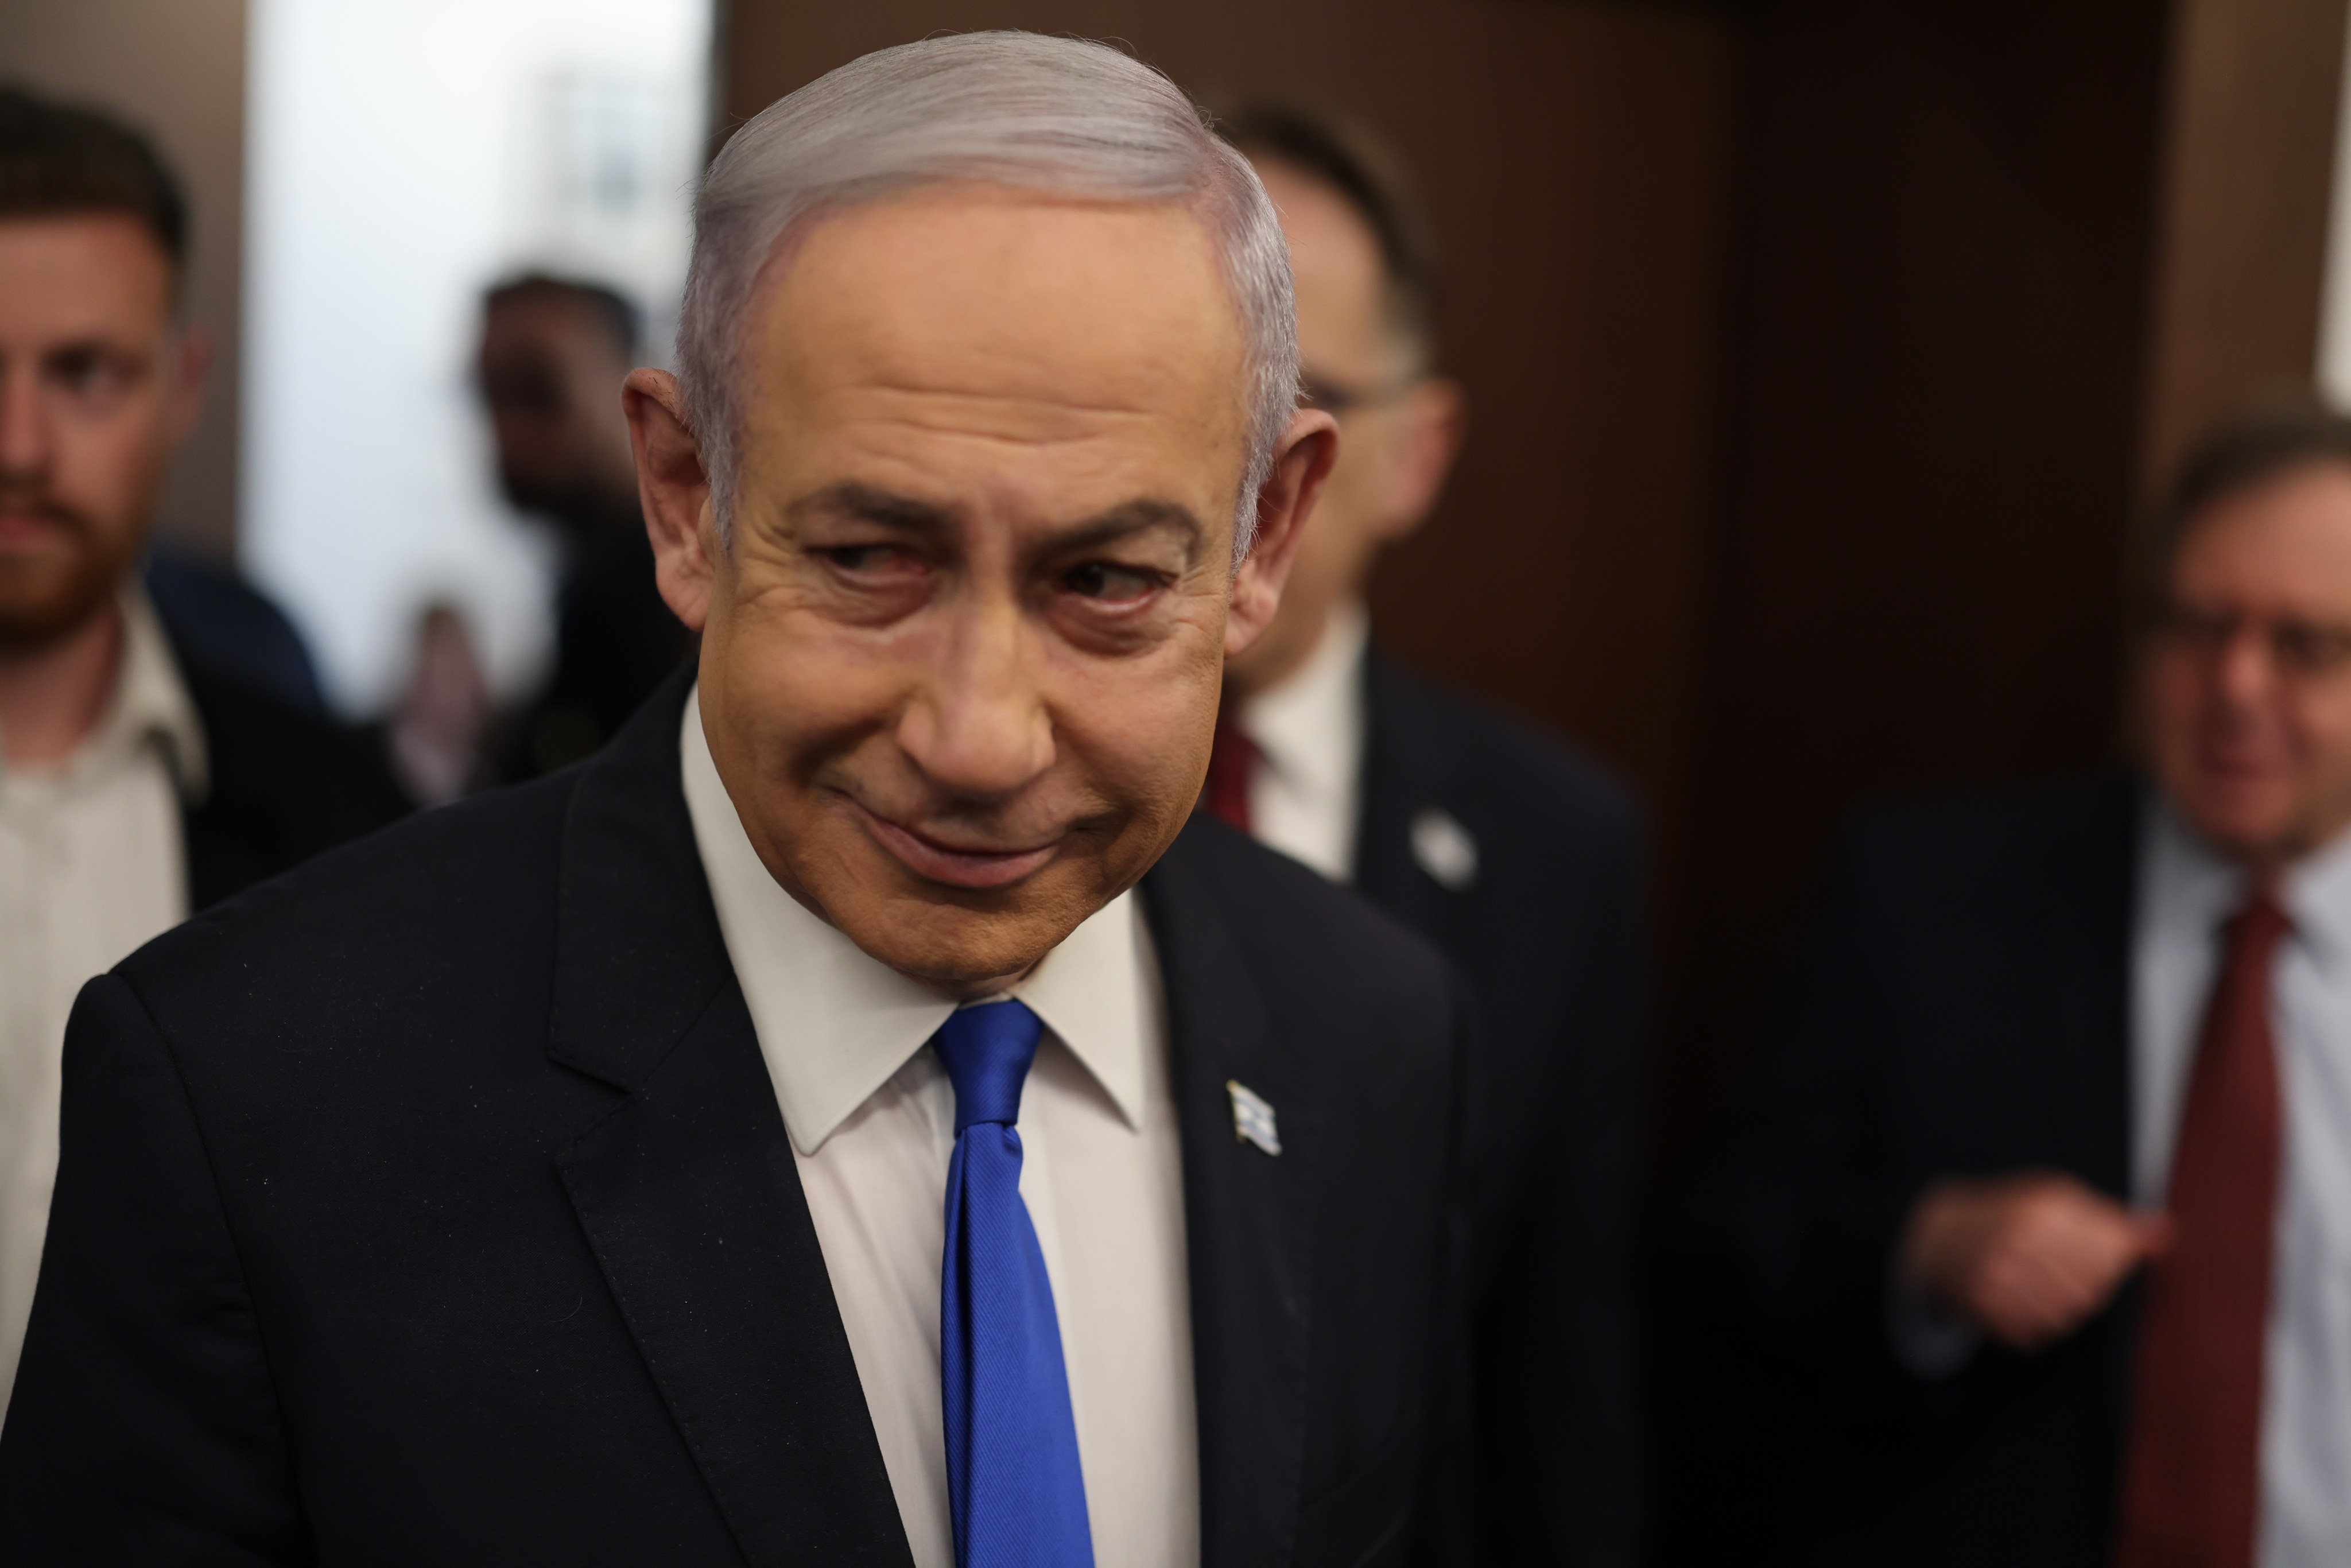 Benjamin Netanyahu, Israel’s Prime Minister says his country has a right to defend itself, following strikes from Iran this past weekend. Photo: dpa